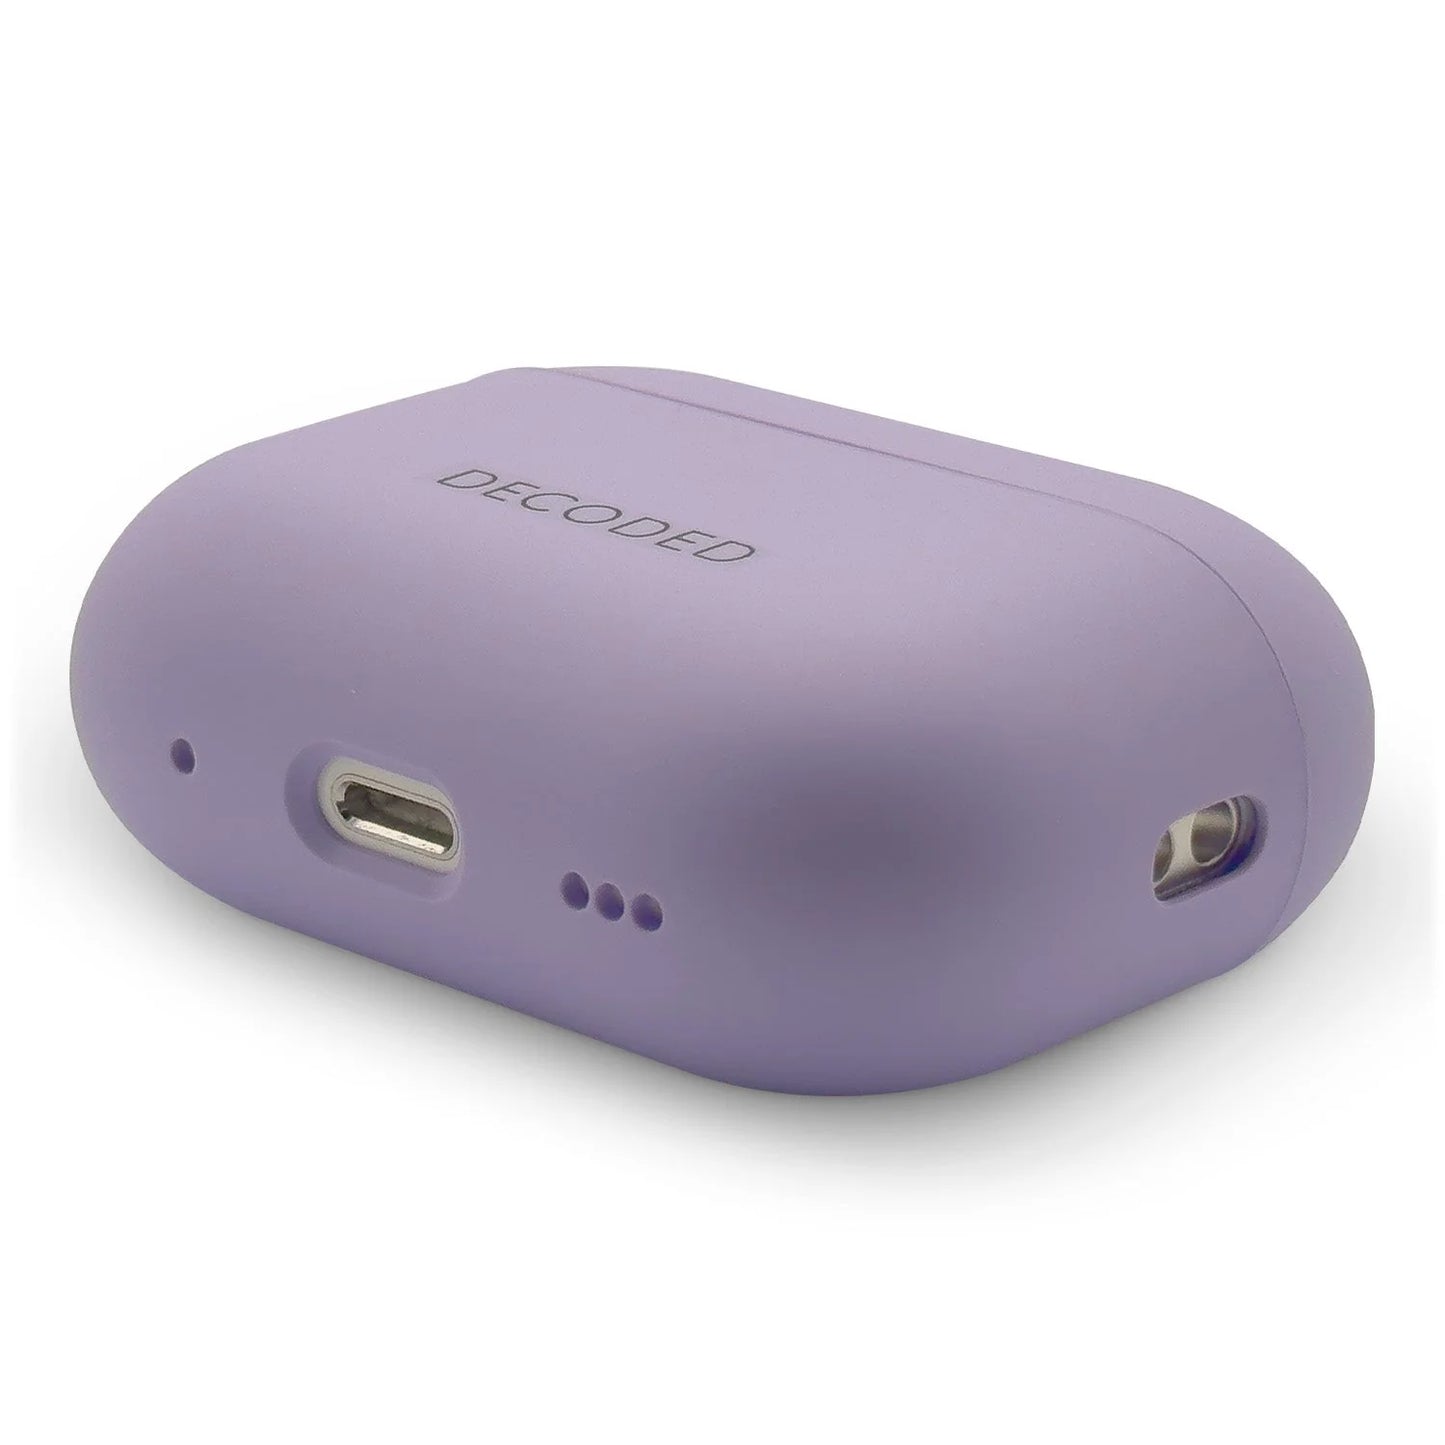 Decoded Silicone Aircase voor AirPods Pro (2e gen.) - Lavender